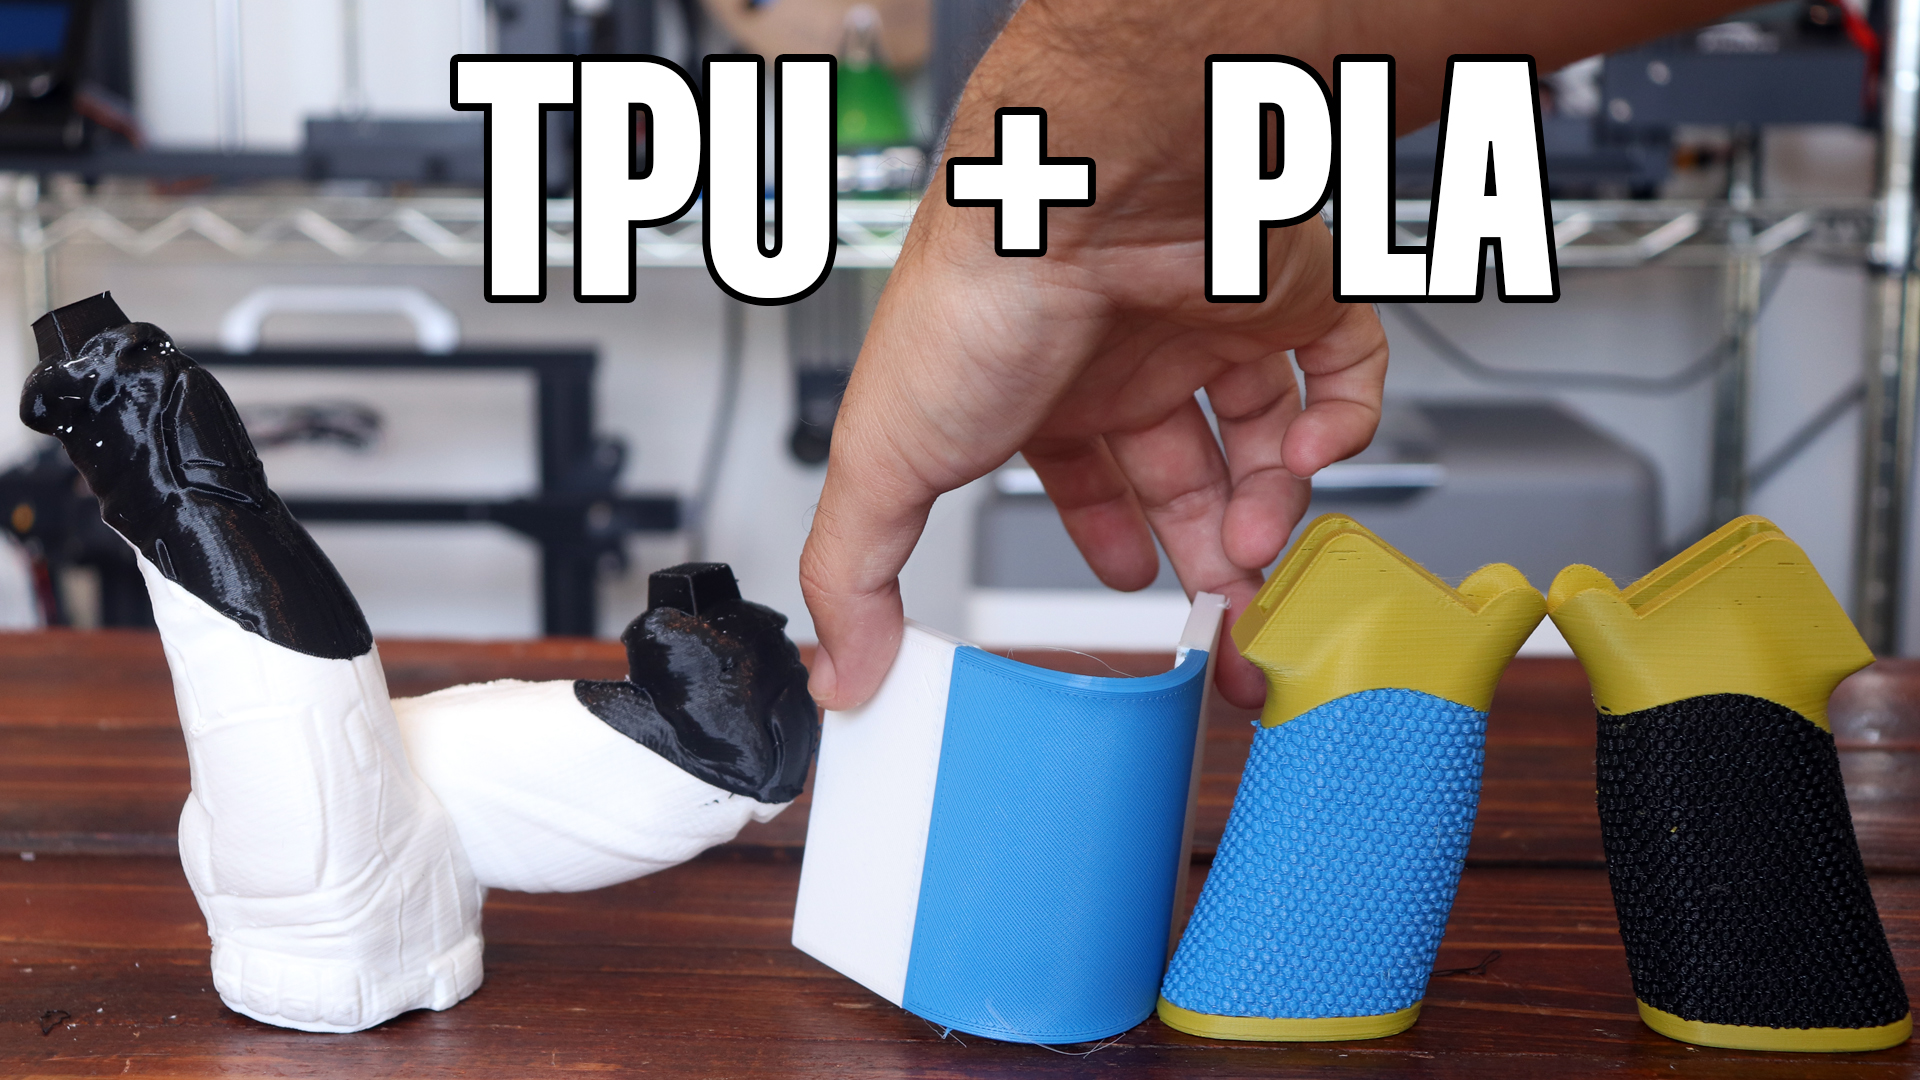 Combining TPU and PLA